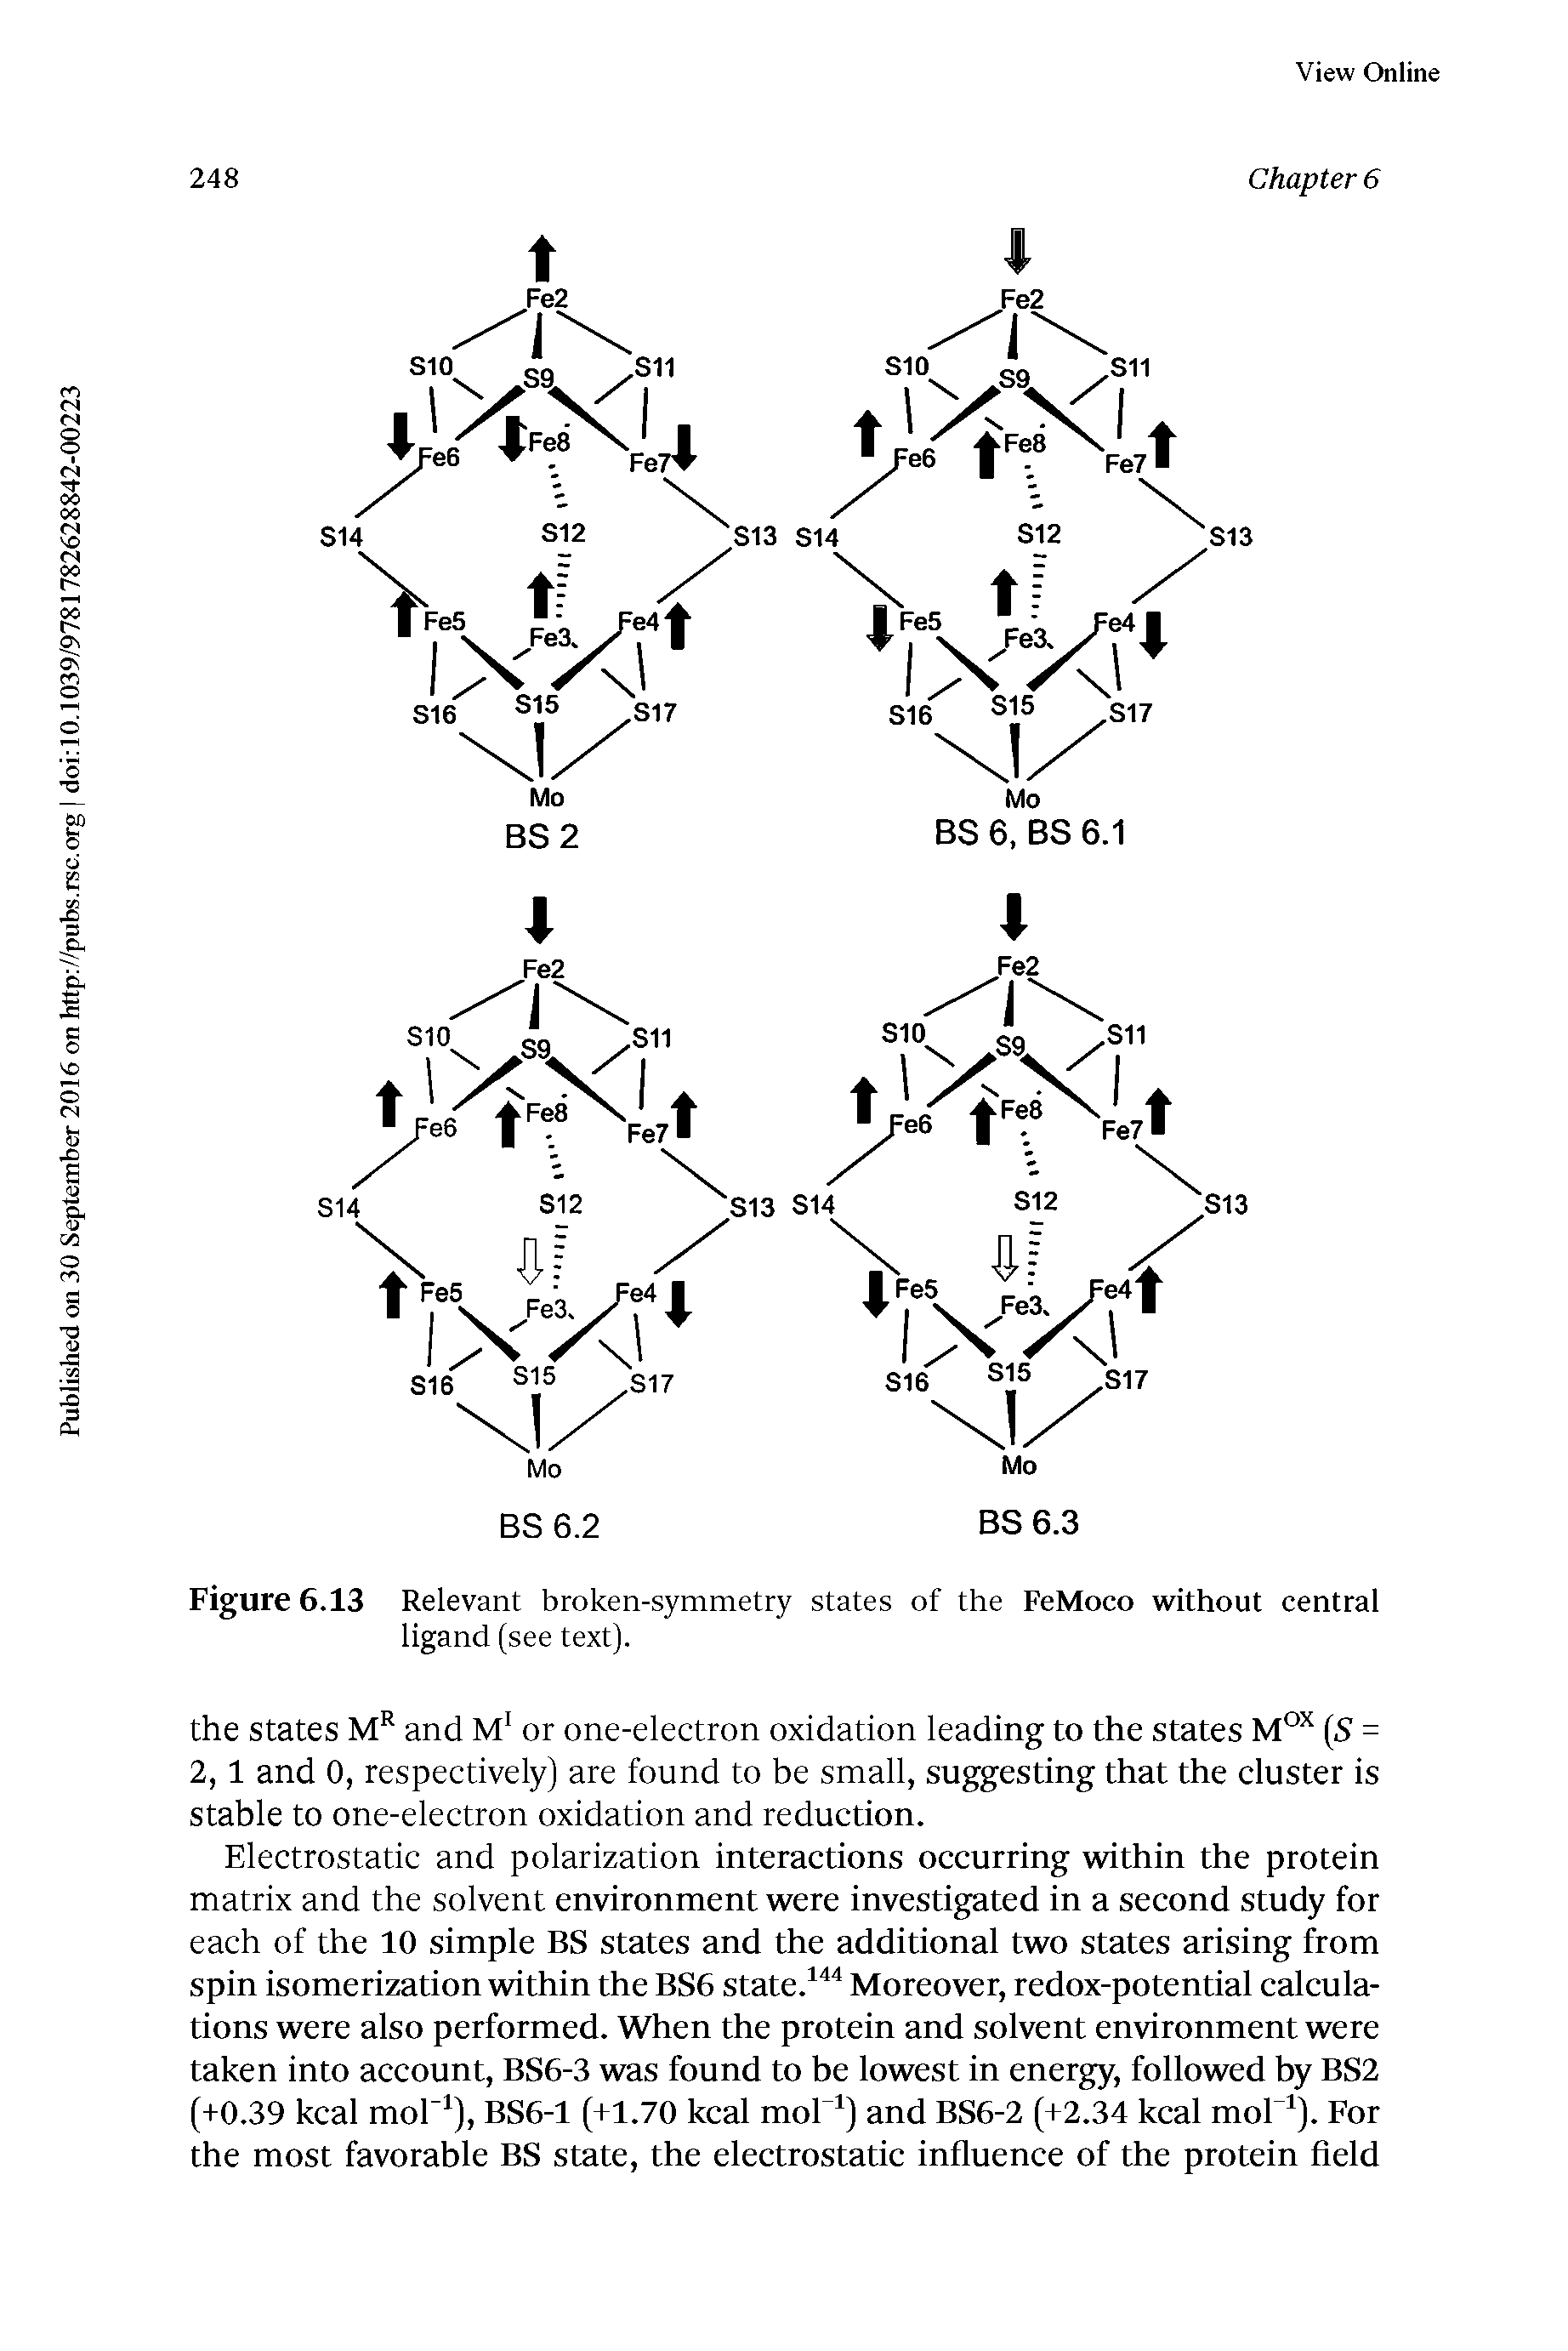 Figure 6.13 Relevant broken-symmetry states of the FeMoco without central ligand (see text).